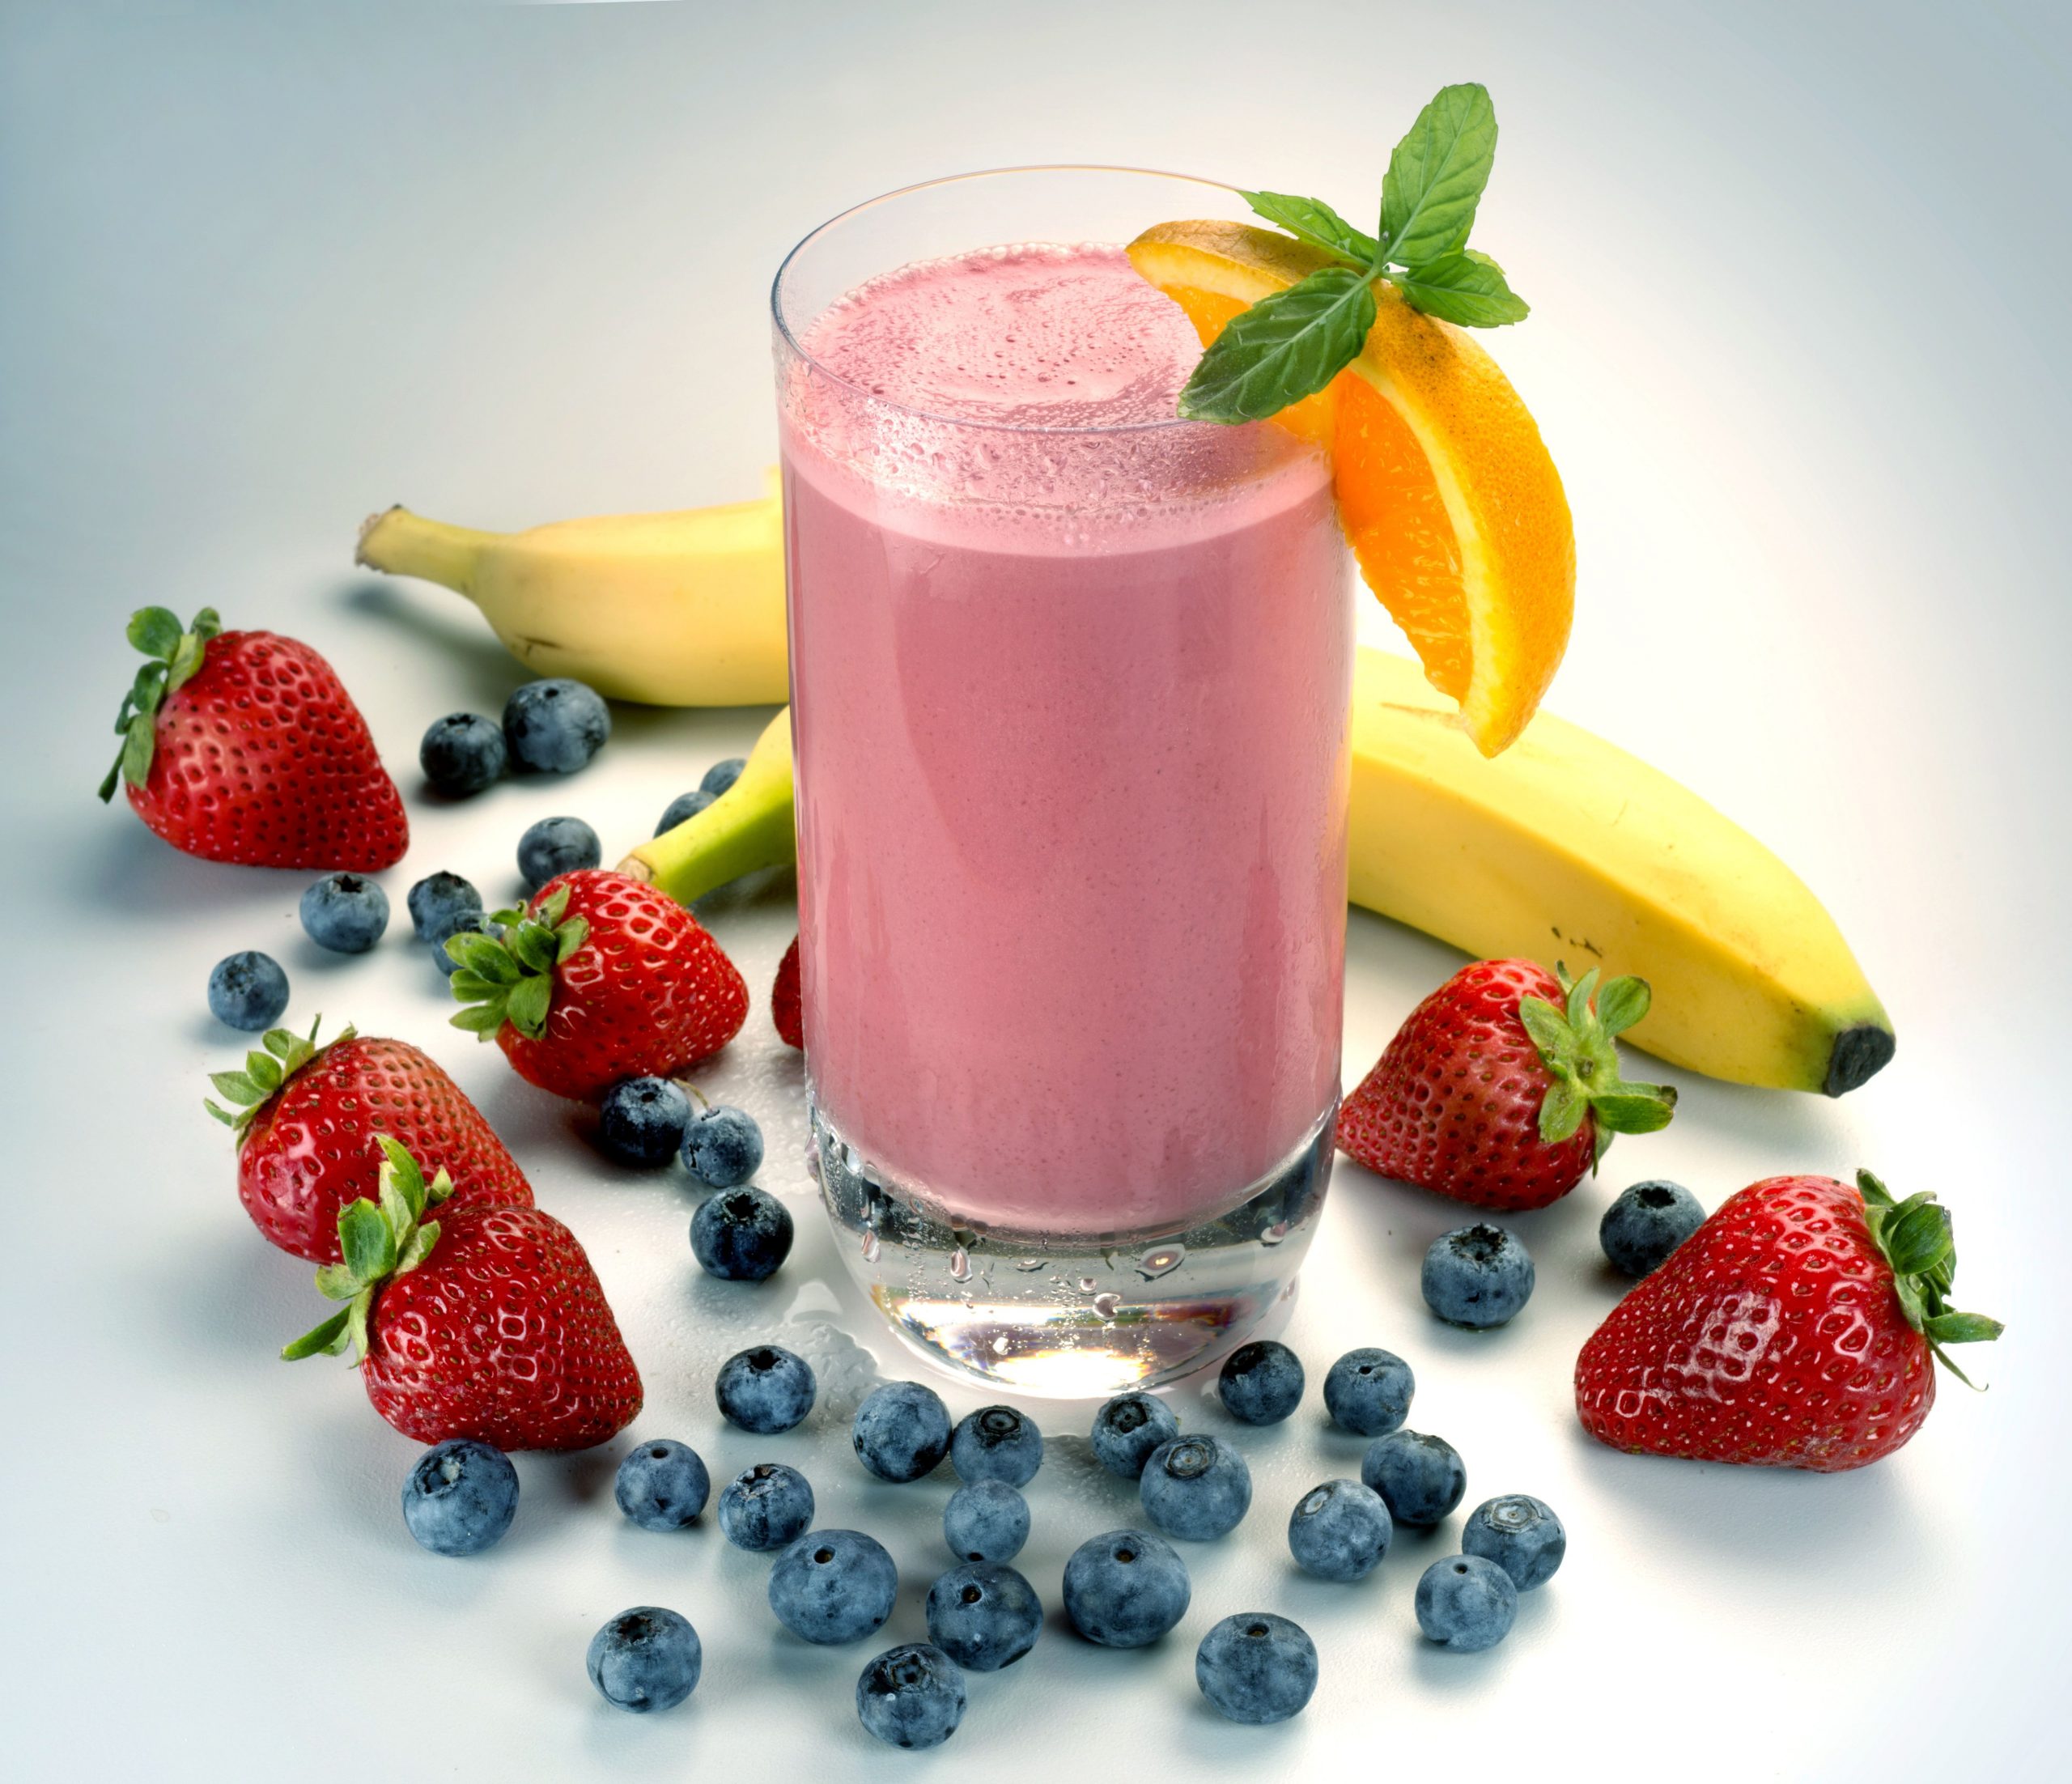 How to Make an IBS Friendly Smoothie